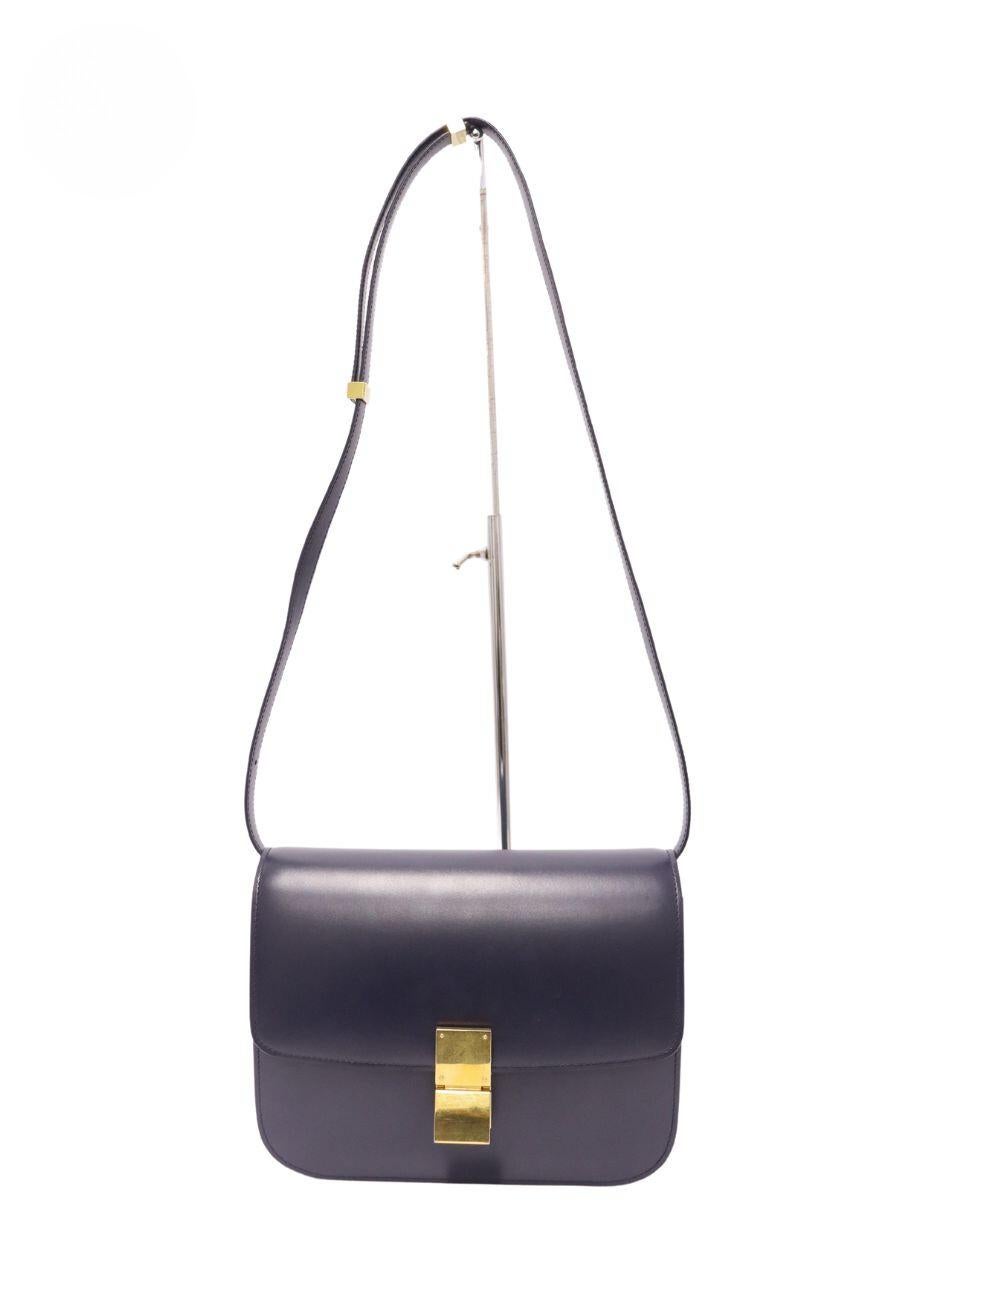 Celine Navy Leather Medium Classic Box Shoulder Bag, Features a leather adjustable strap, gold plaque, two compartments and one interior pocket.

Material: Leather
Hardware: Gold
Height: 18cm
Width: 23cm
Depth: 8cm
Strap Drop: 44cm
Overall